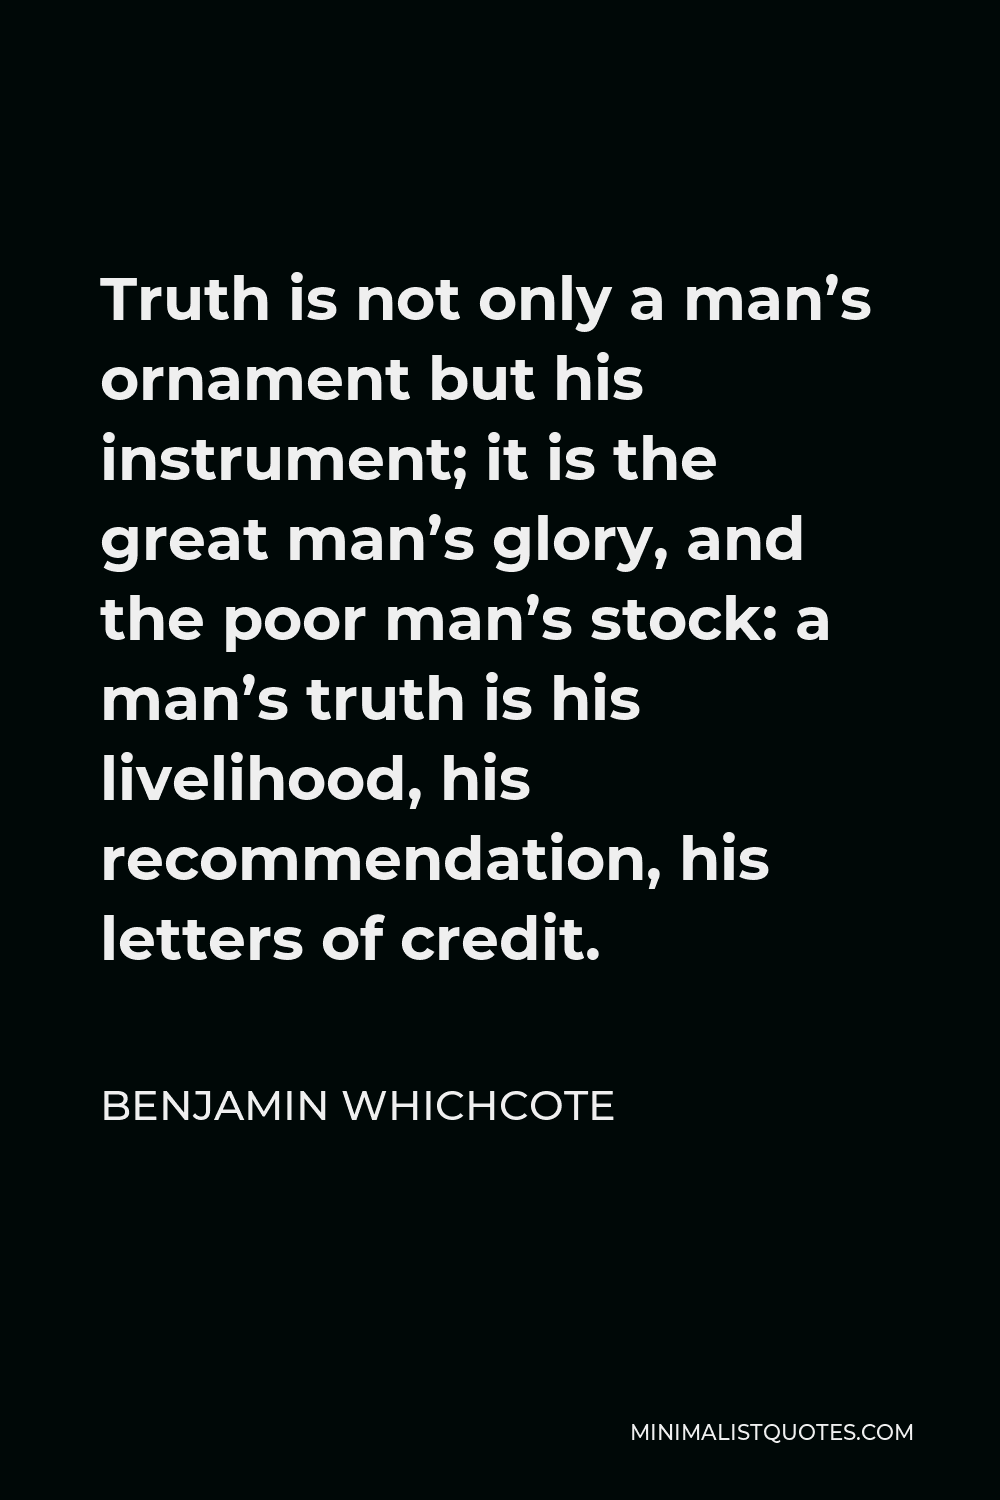 Benjamin Whichcote Quote - Truth is not only a man’s ornament but his instrument; it is the great man’s glory, and the poor man’s stock: a man’s truth is his livelihood, his recommendation, his letters of credit.